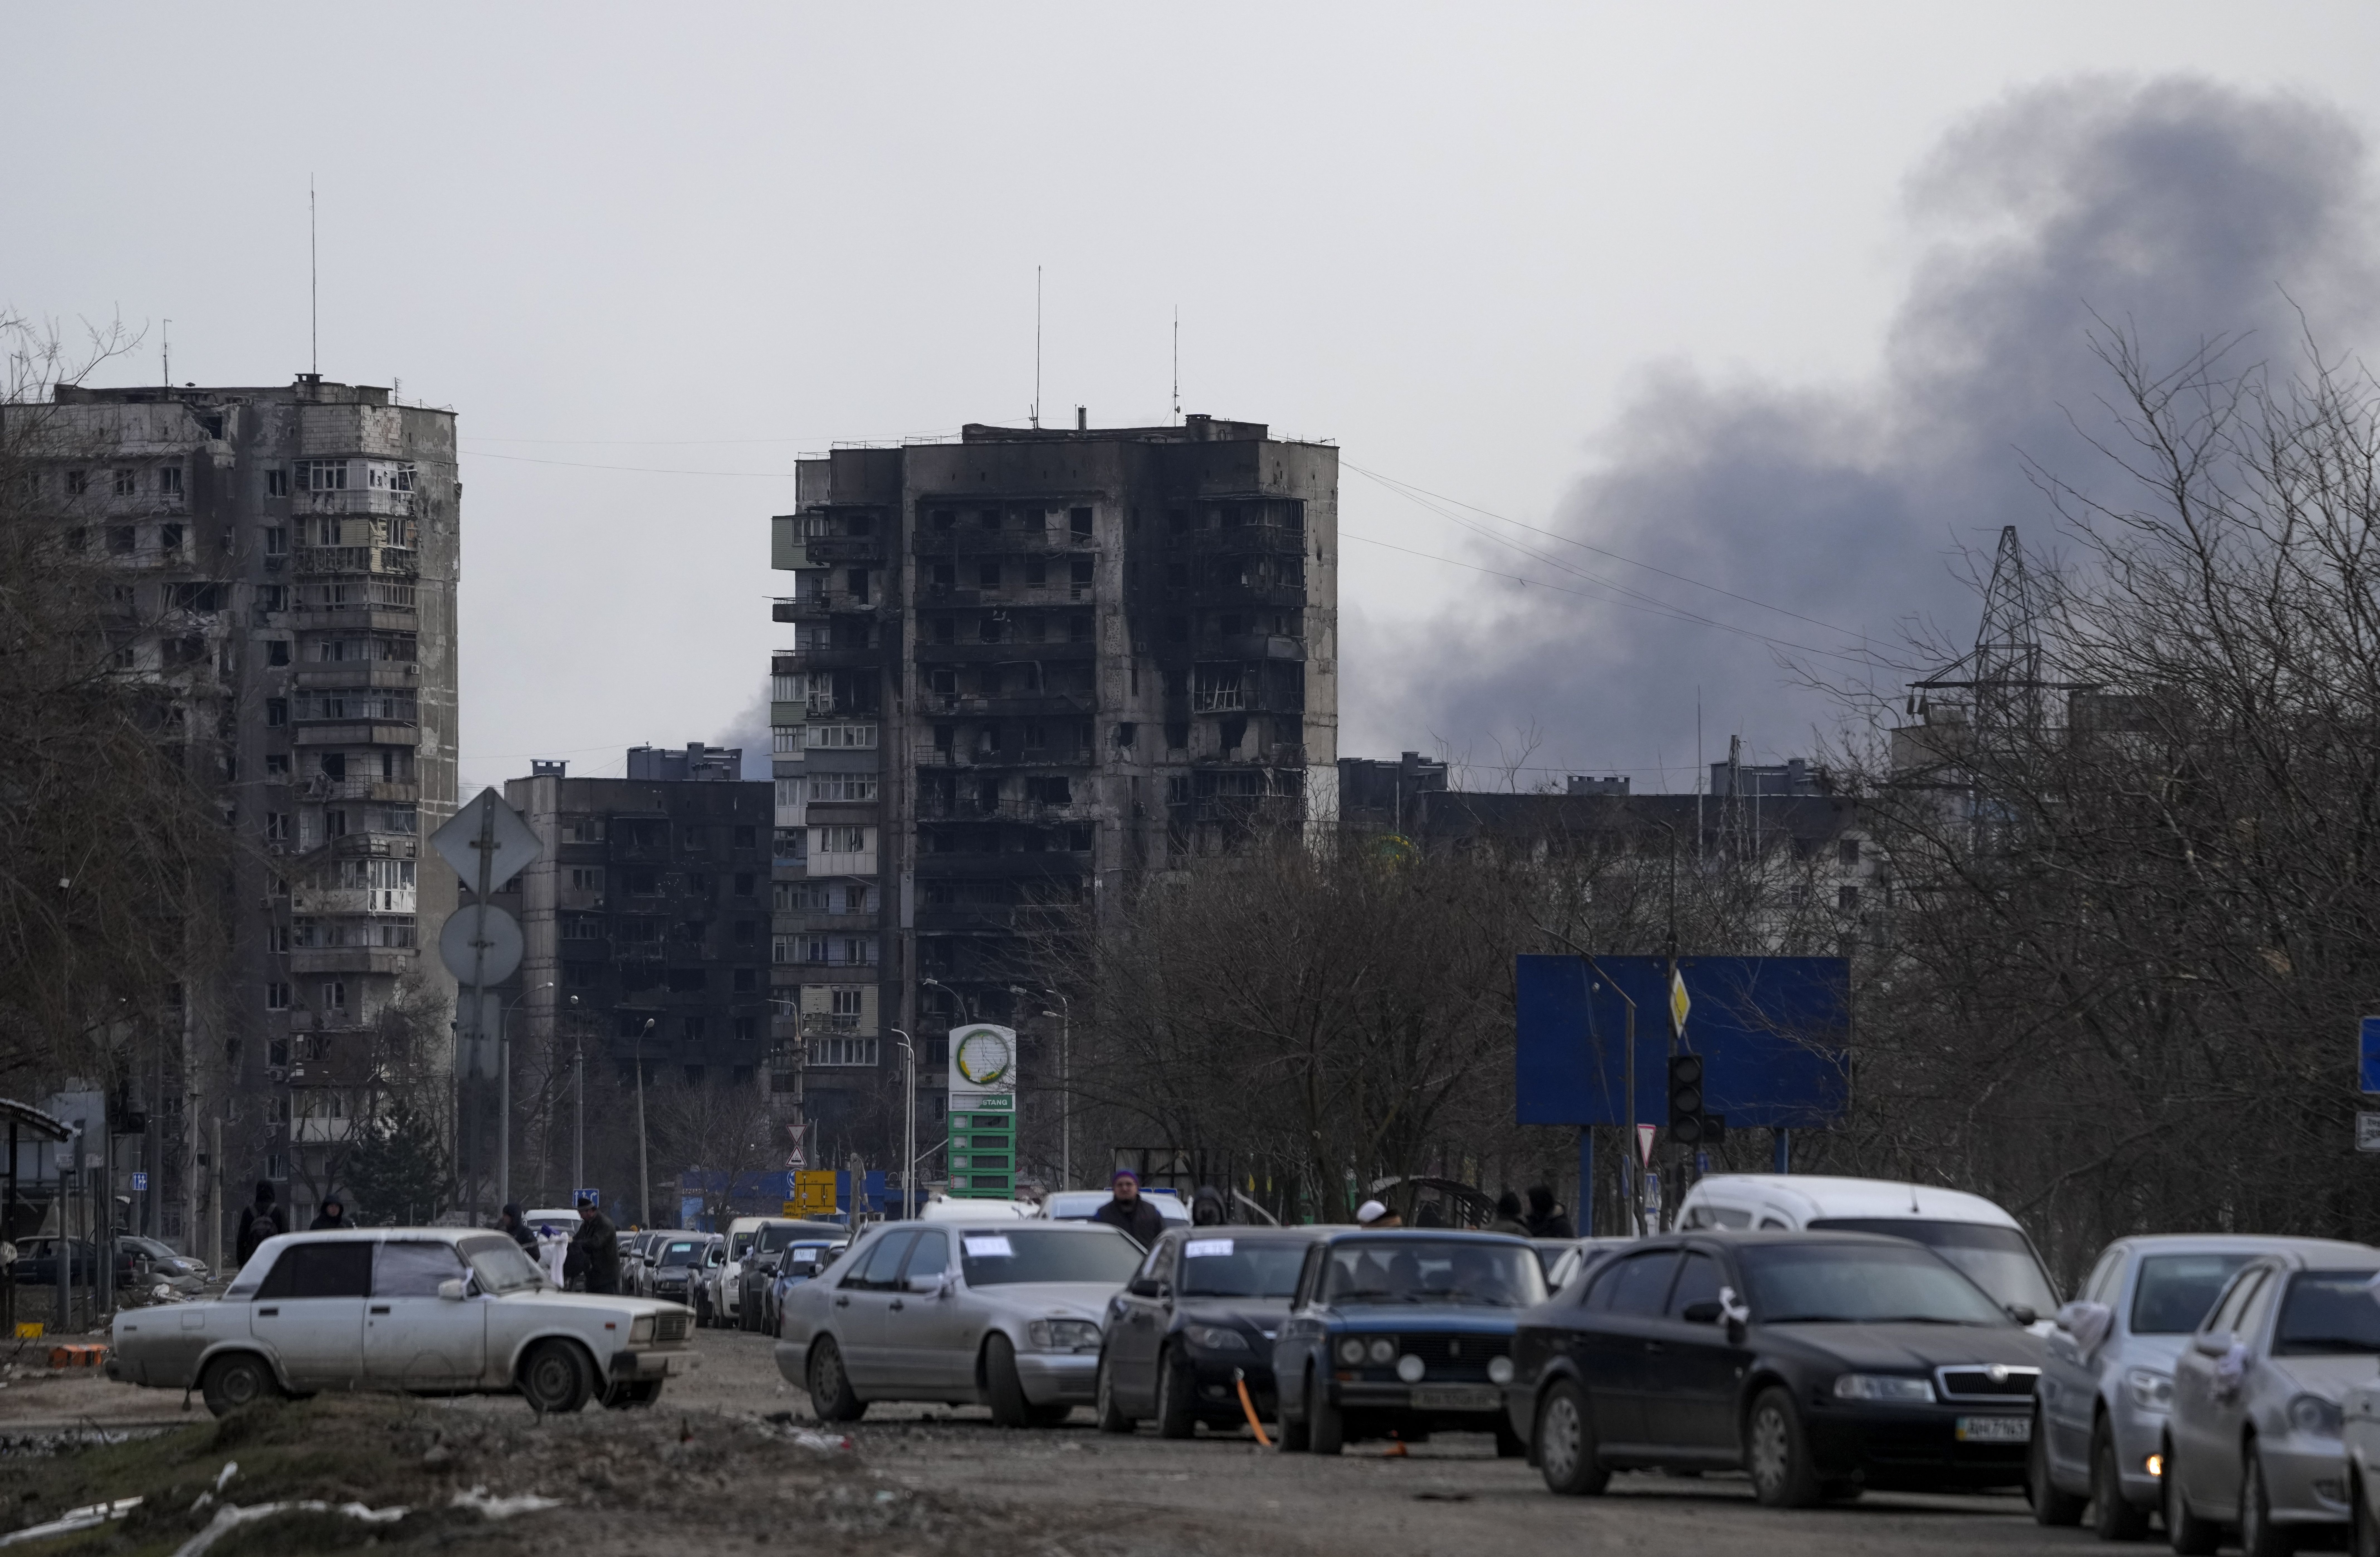 Smoke rises from behind Mariupol buildings as the city's civilians are evacuated in groups under the control of pro-Russian separatists on March 20.